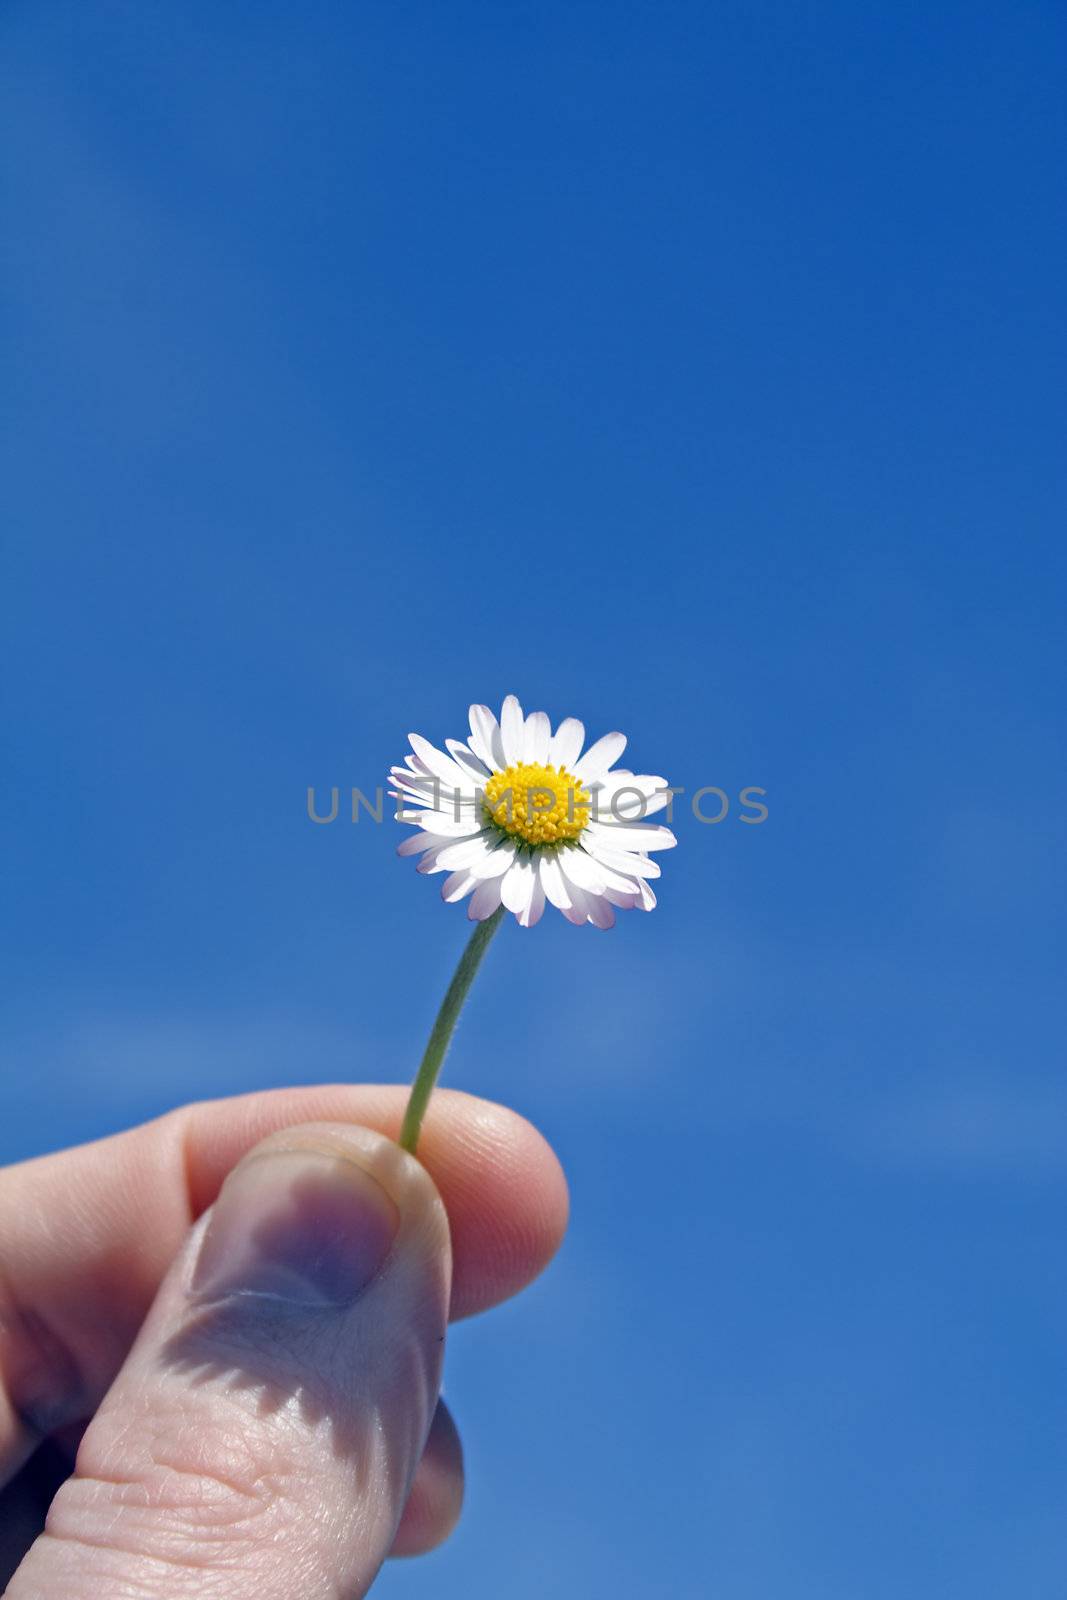 A daisy in front of a shiny blue sky.